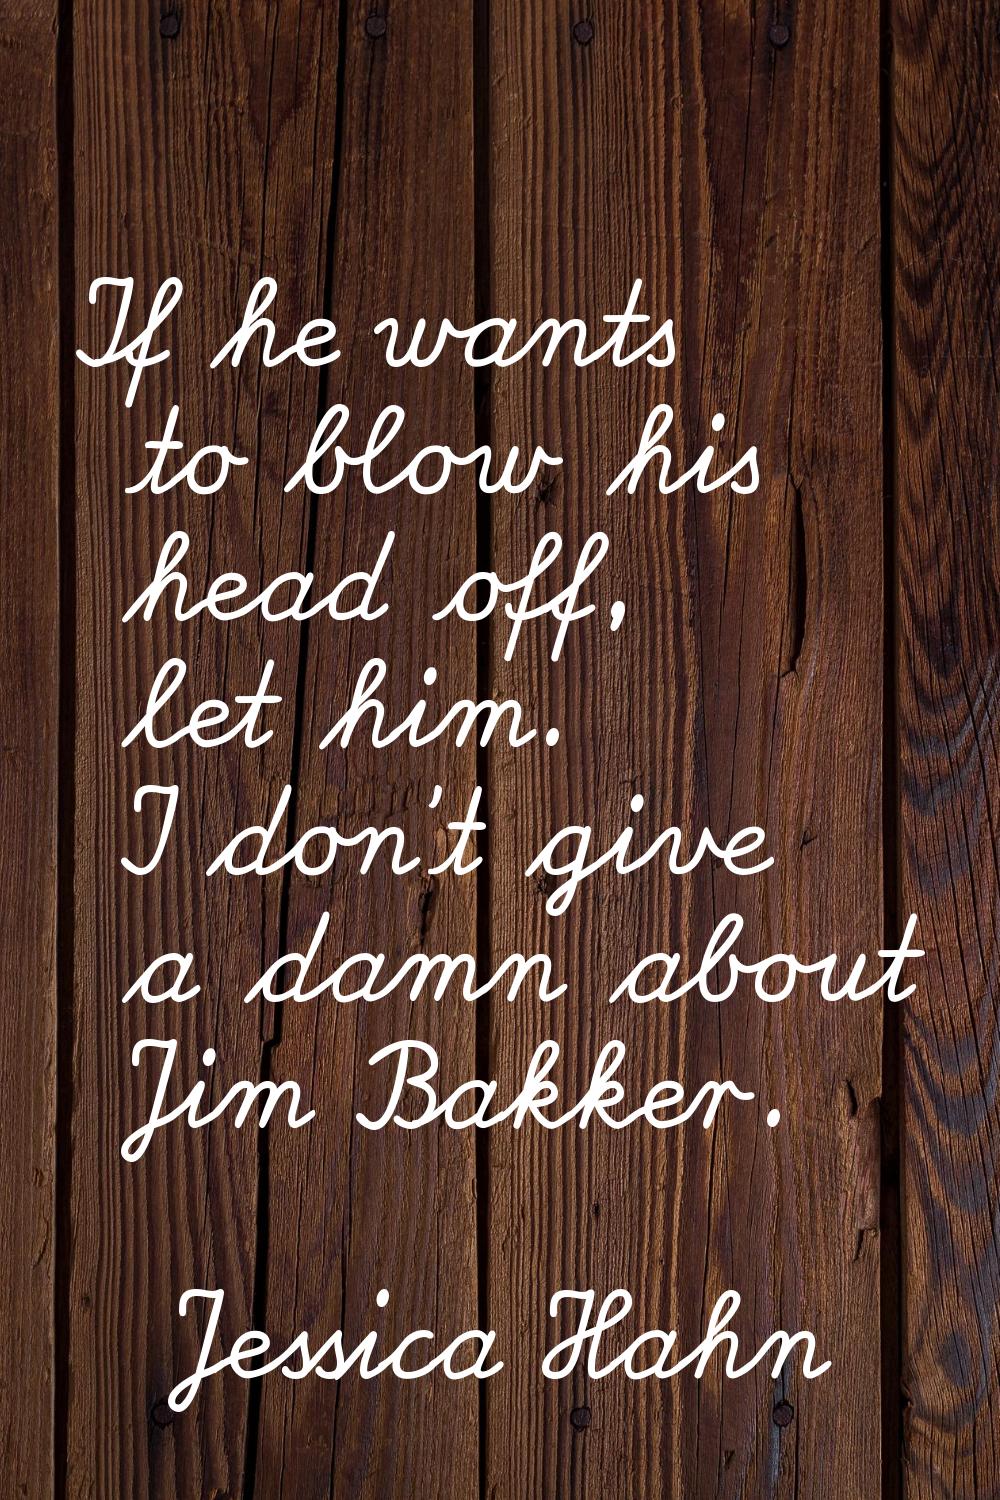 If he wants to blow his head off, let him. I don't give a damn about Jim Bakker.